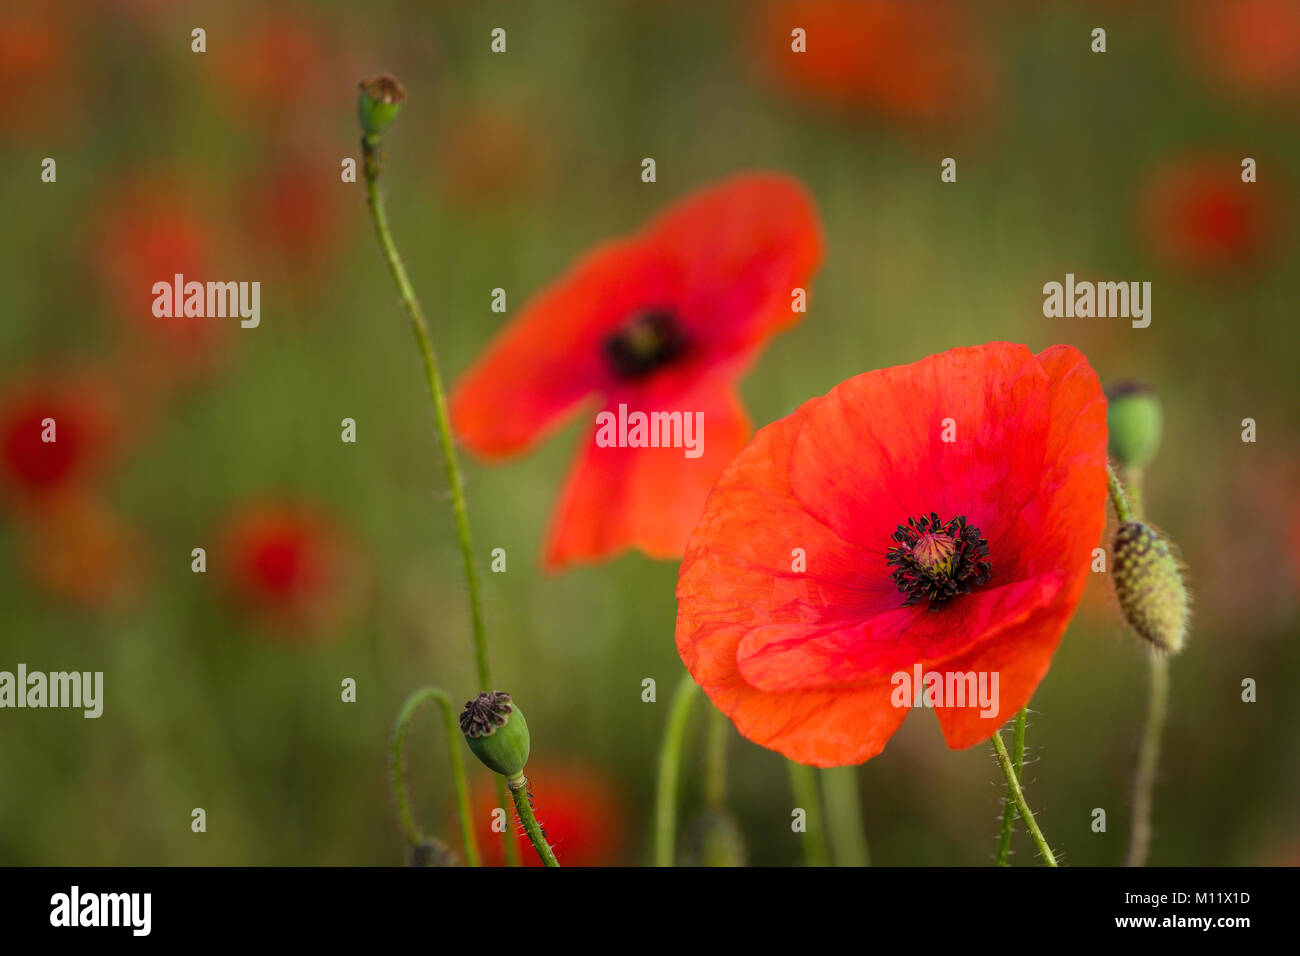 Part of an abandoned field full of poppies. Stock Photo